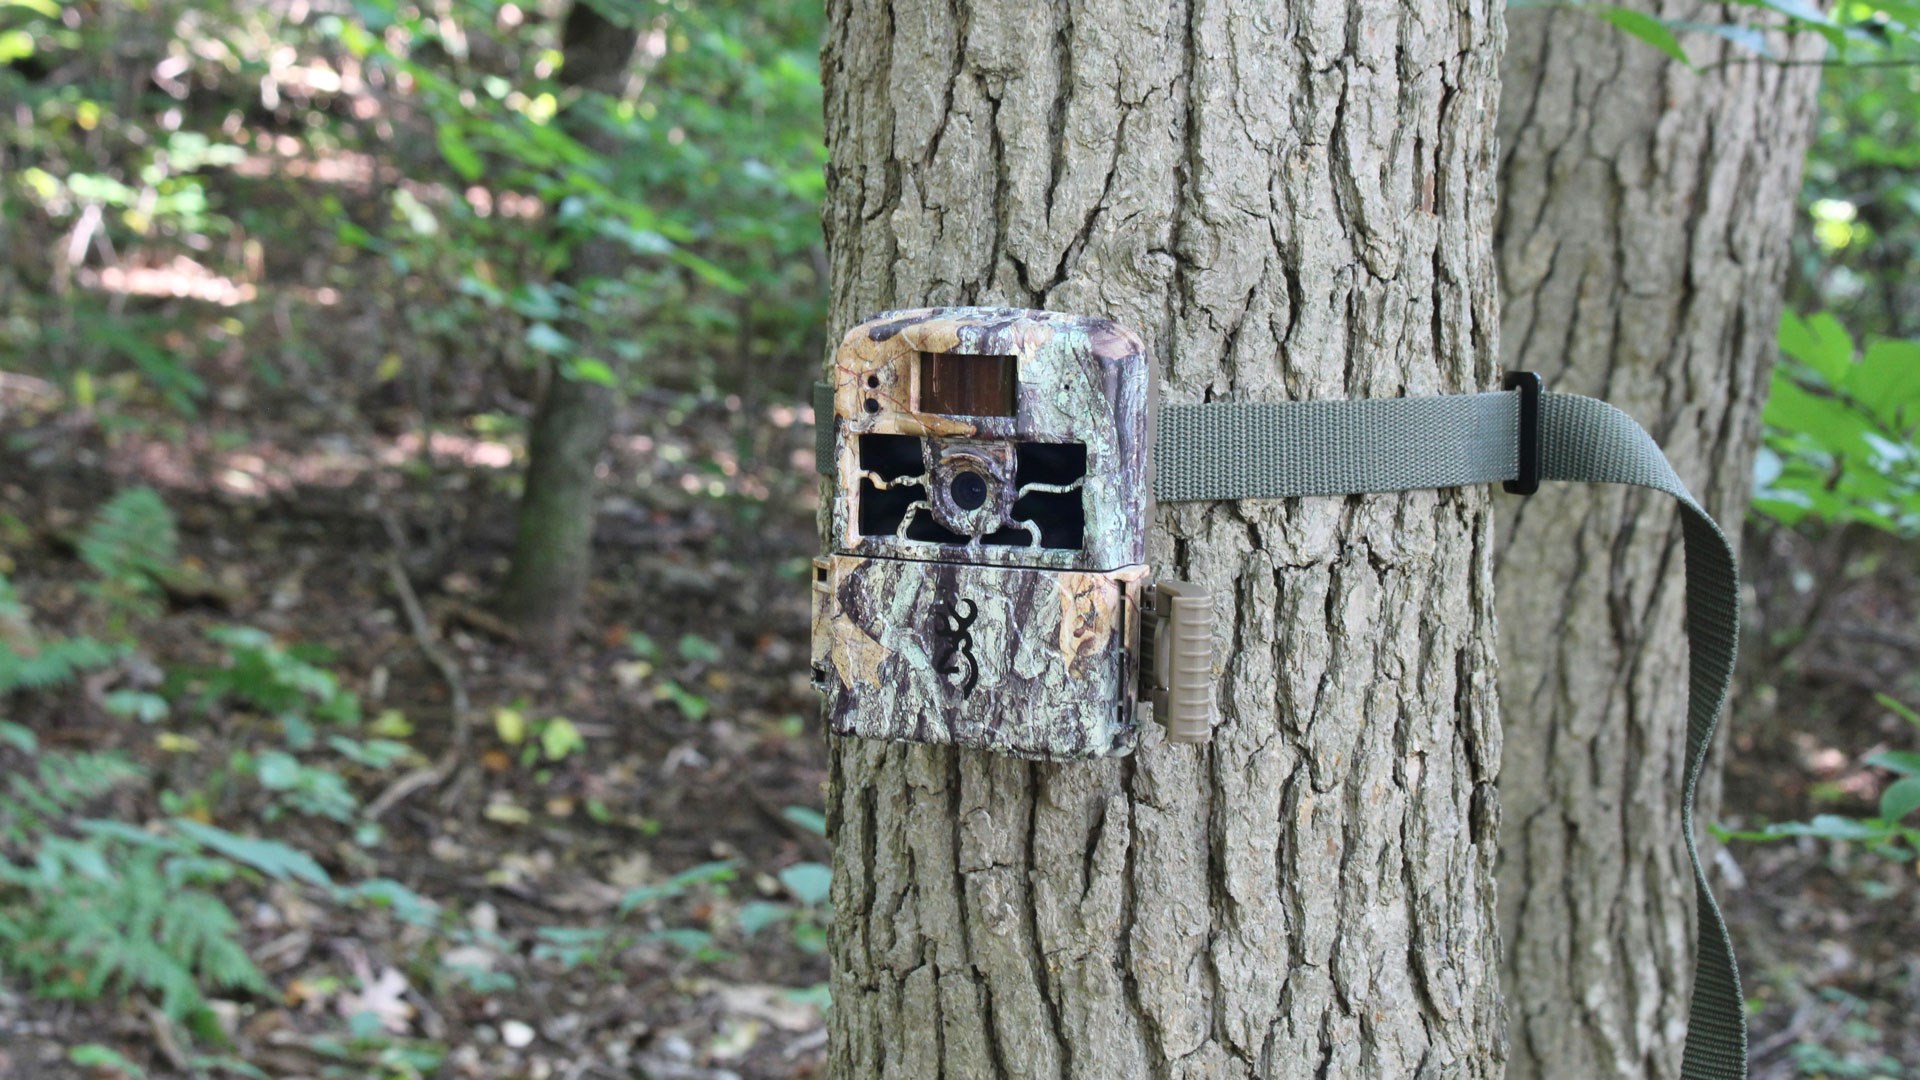 Browning trail camera on tree